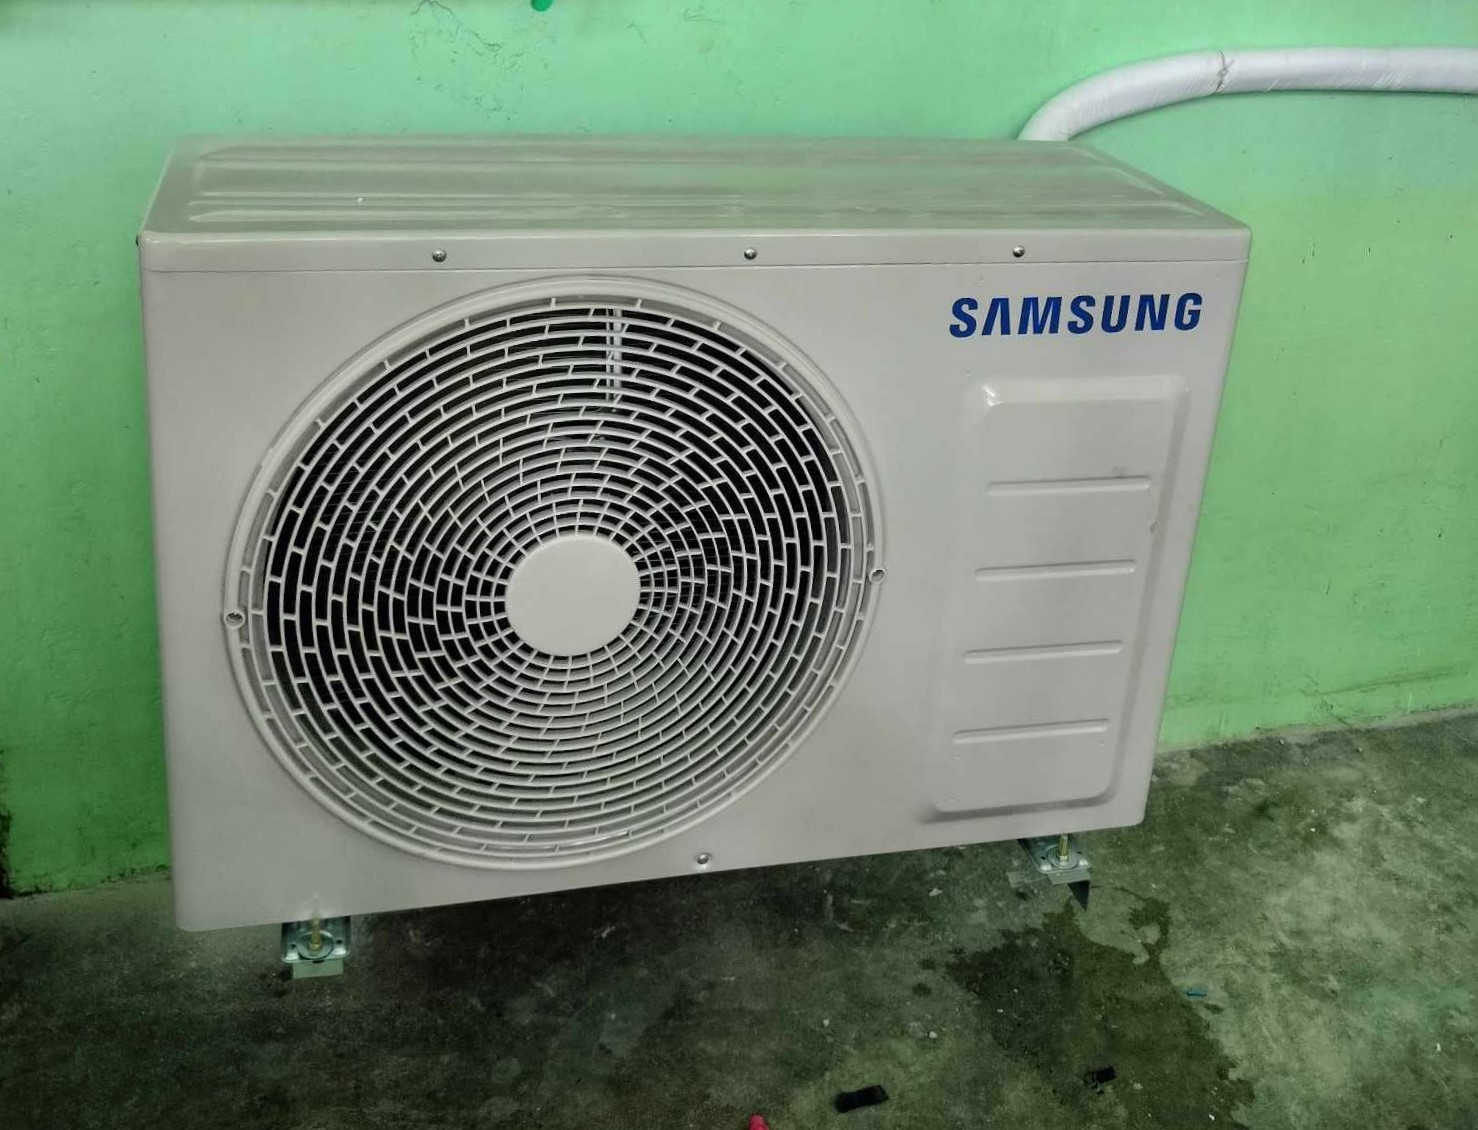 How To Fix The Error Code E240 For Samsung Air Conditioner